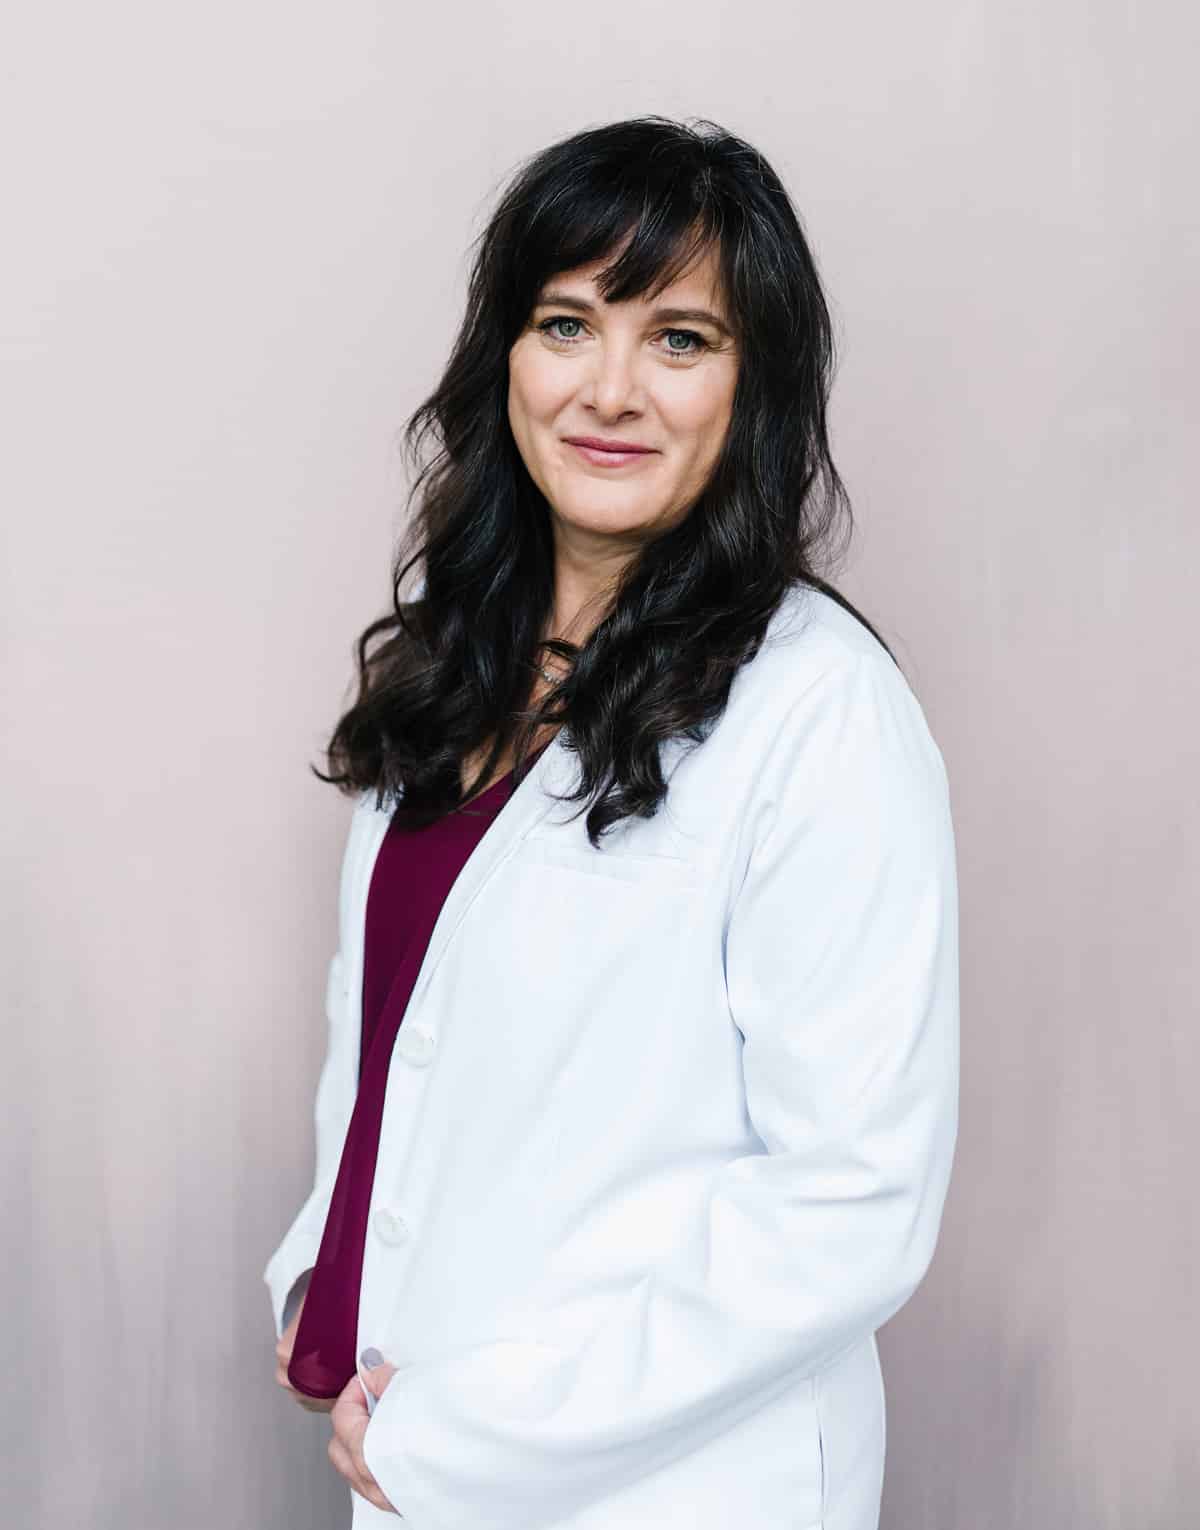 A woman with dark hair wearing a white coat and a maroon top, specializing in pregnancy care, standing against a light pink background.